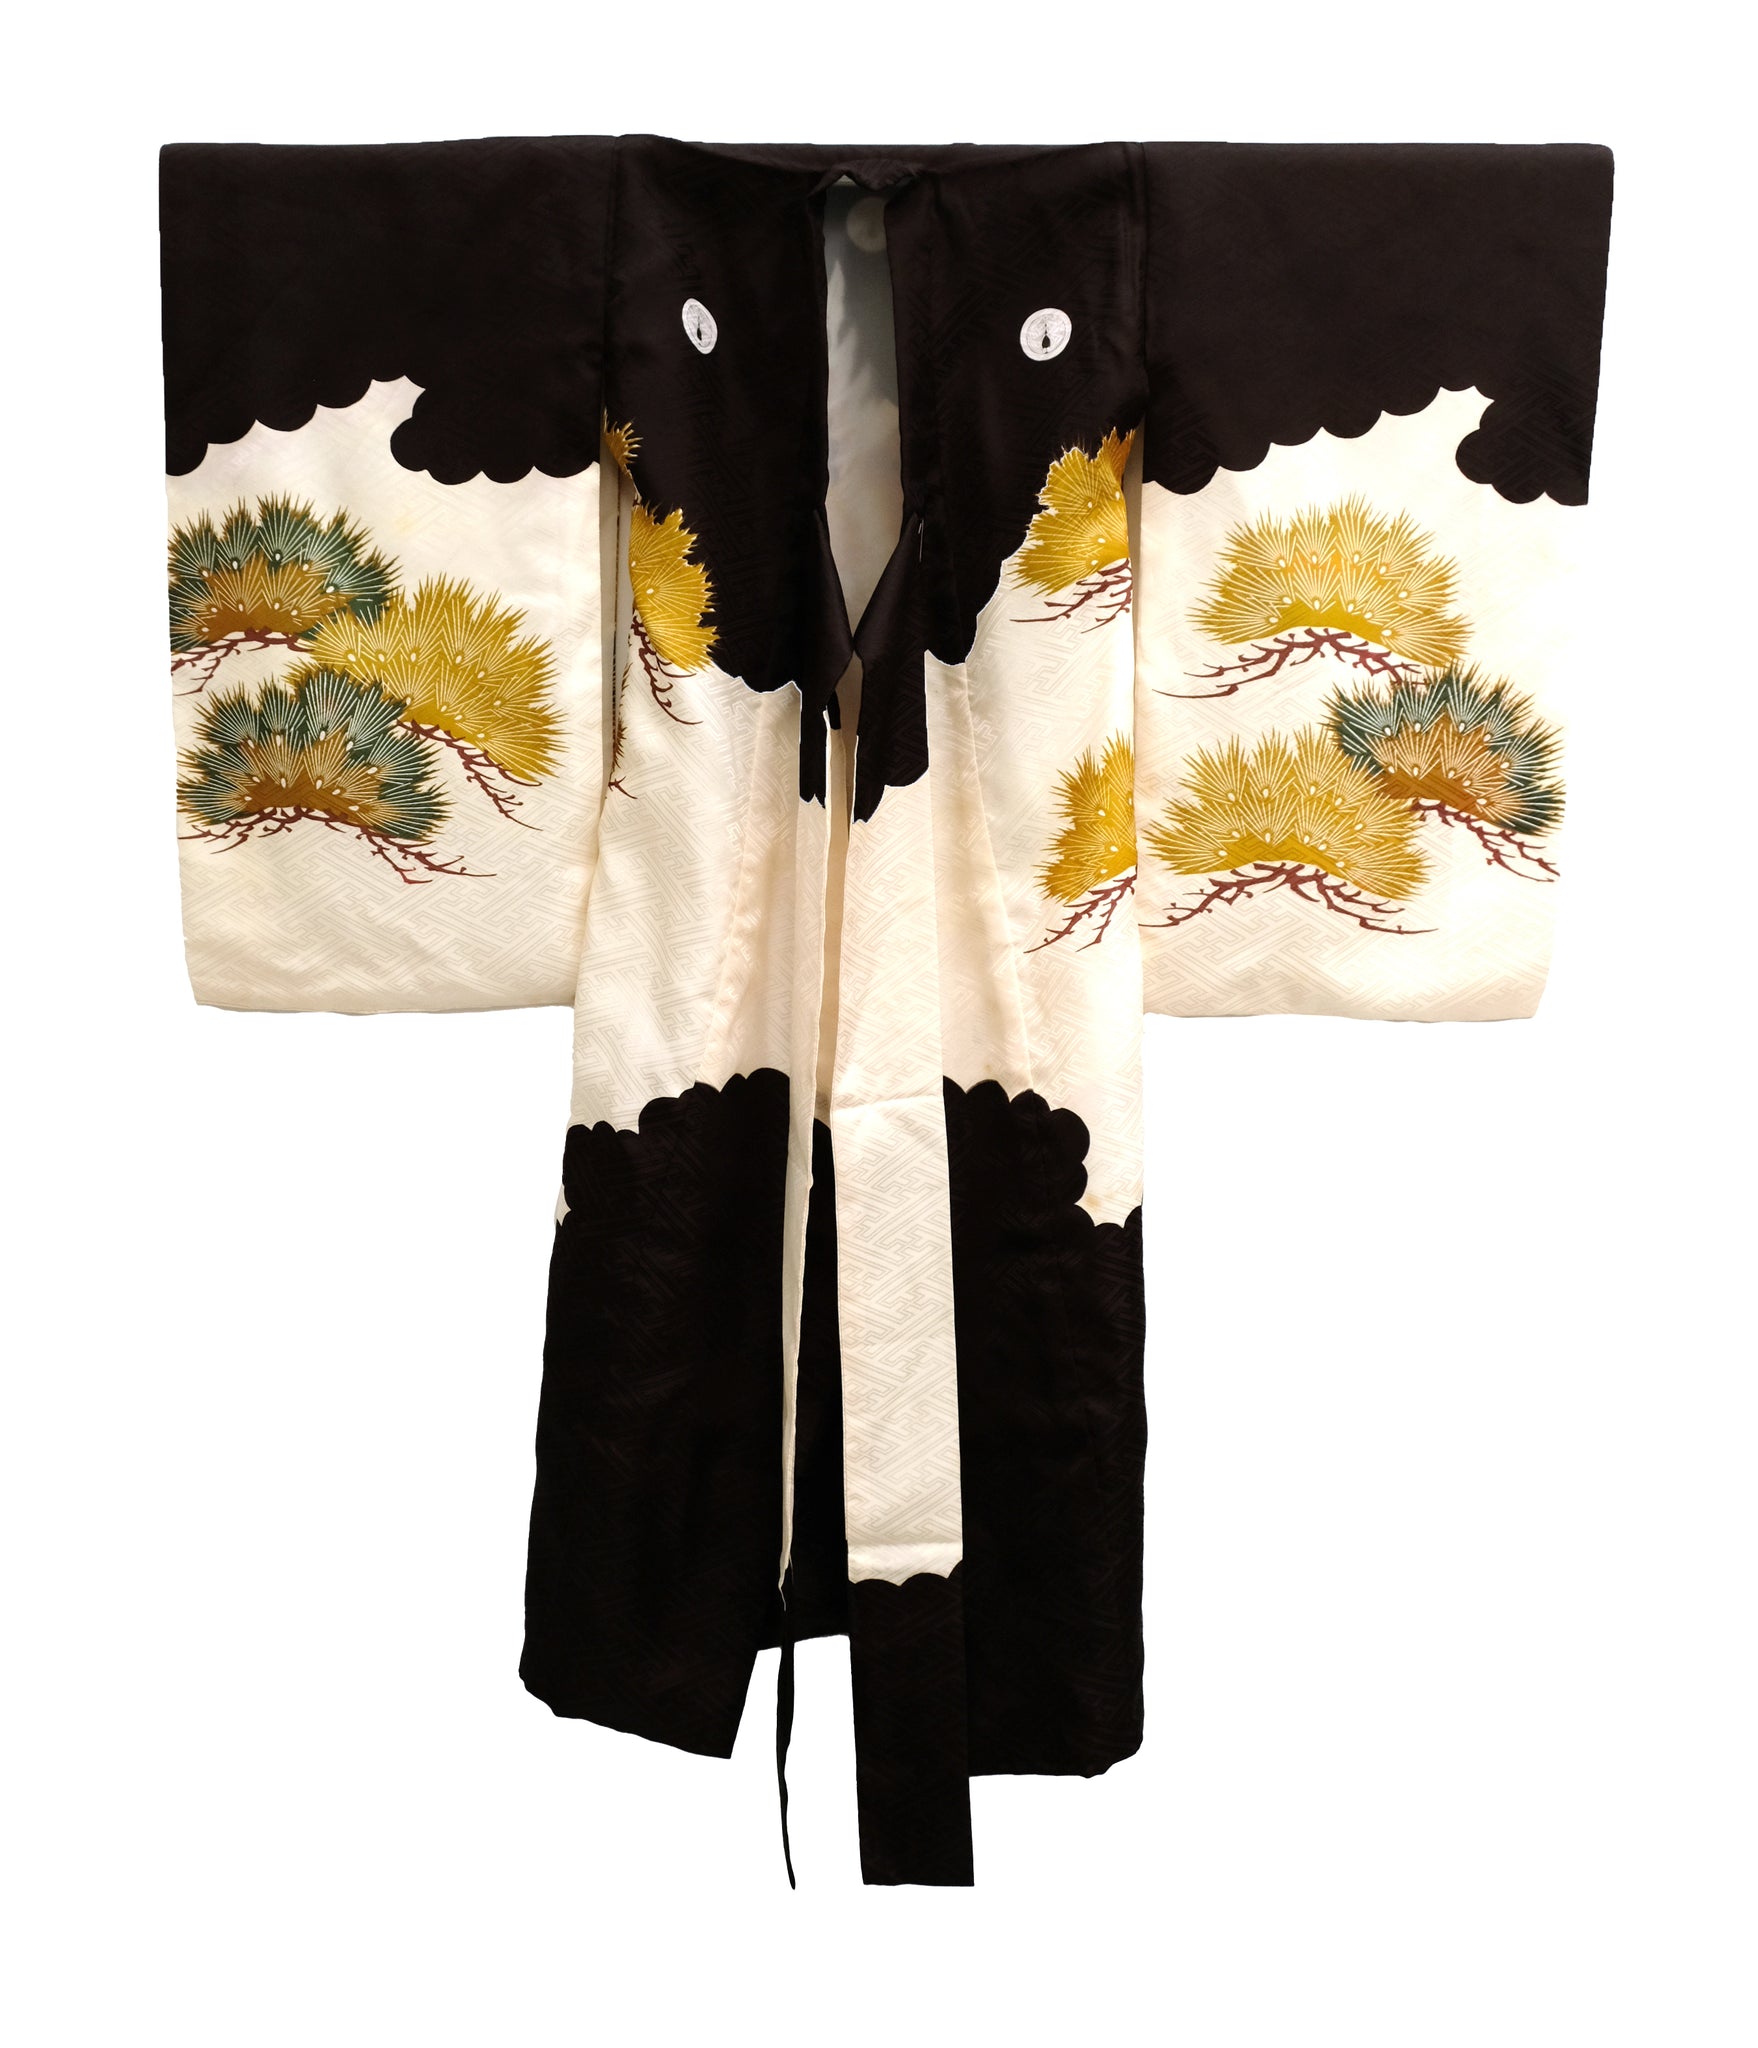 Vintage Child's Kimono in Black and White Jacquard Silk with Embroider ...